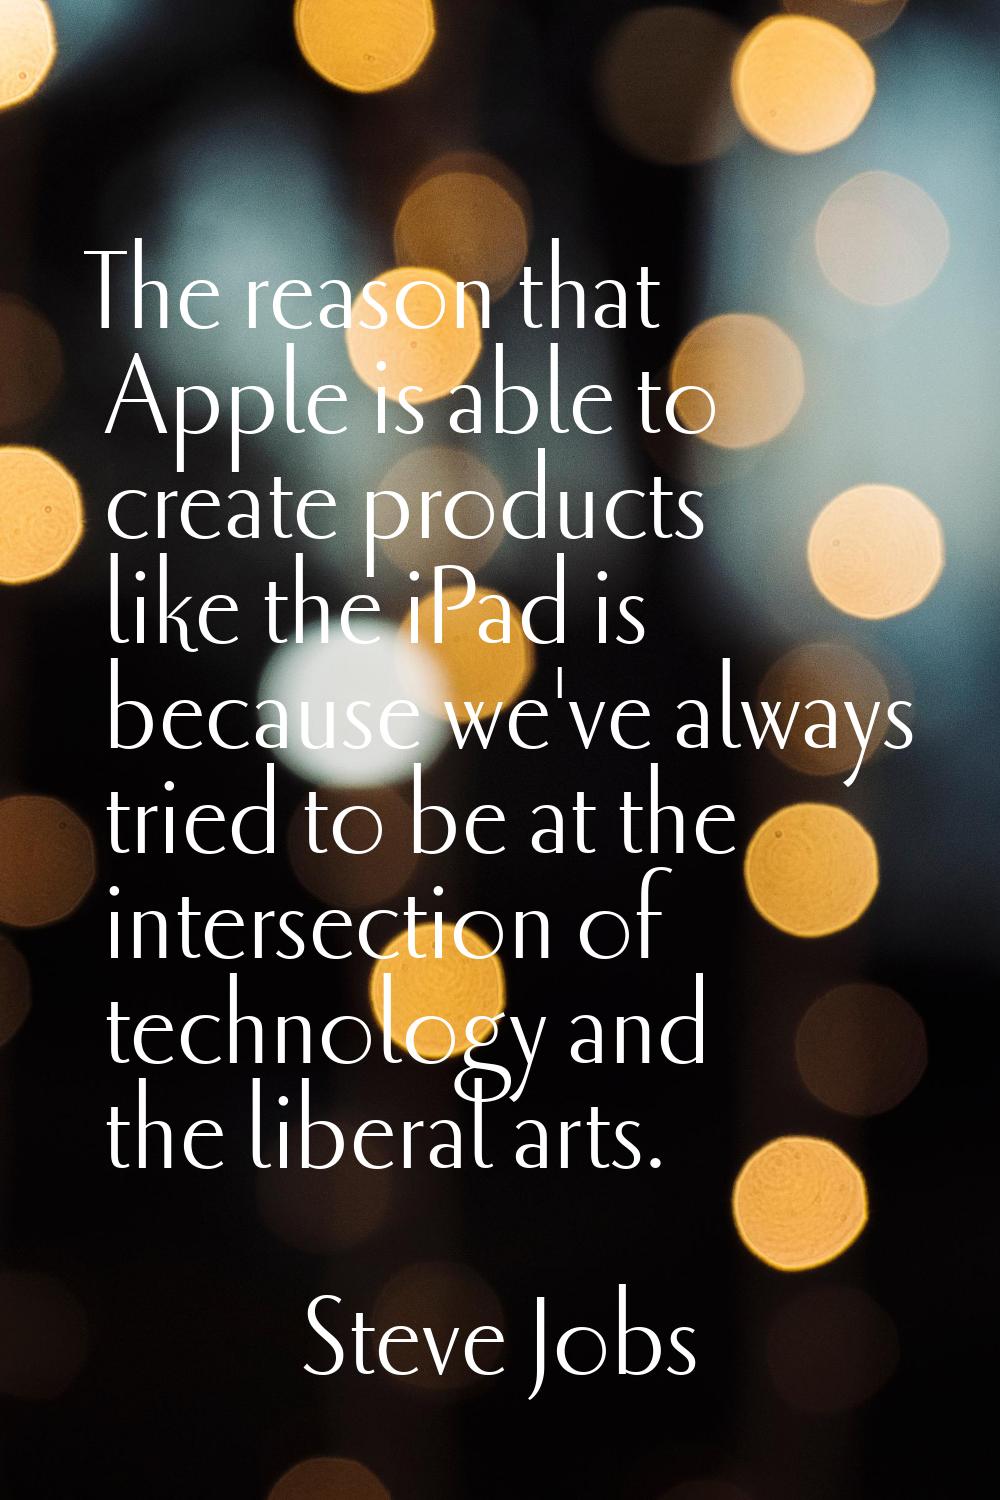 The reason that Apple is able to create products like the iPad is because we've always tried to be 